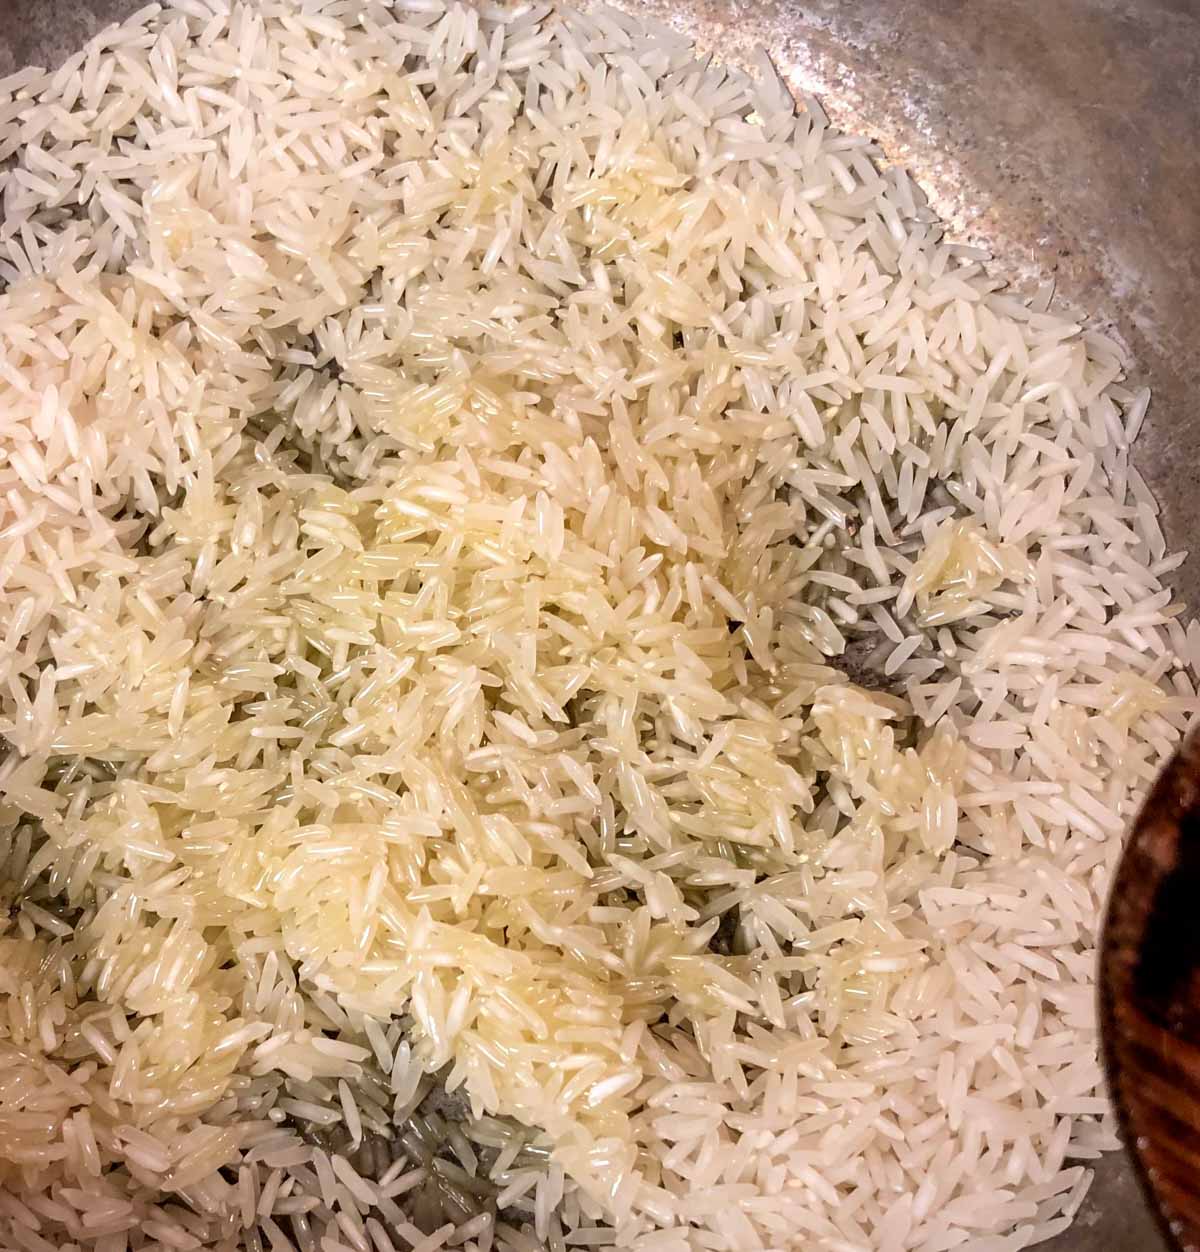 Grains of basmati rice in a pot that have been coated in oil